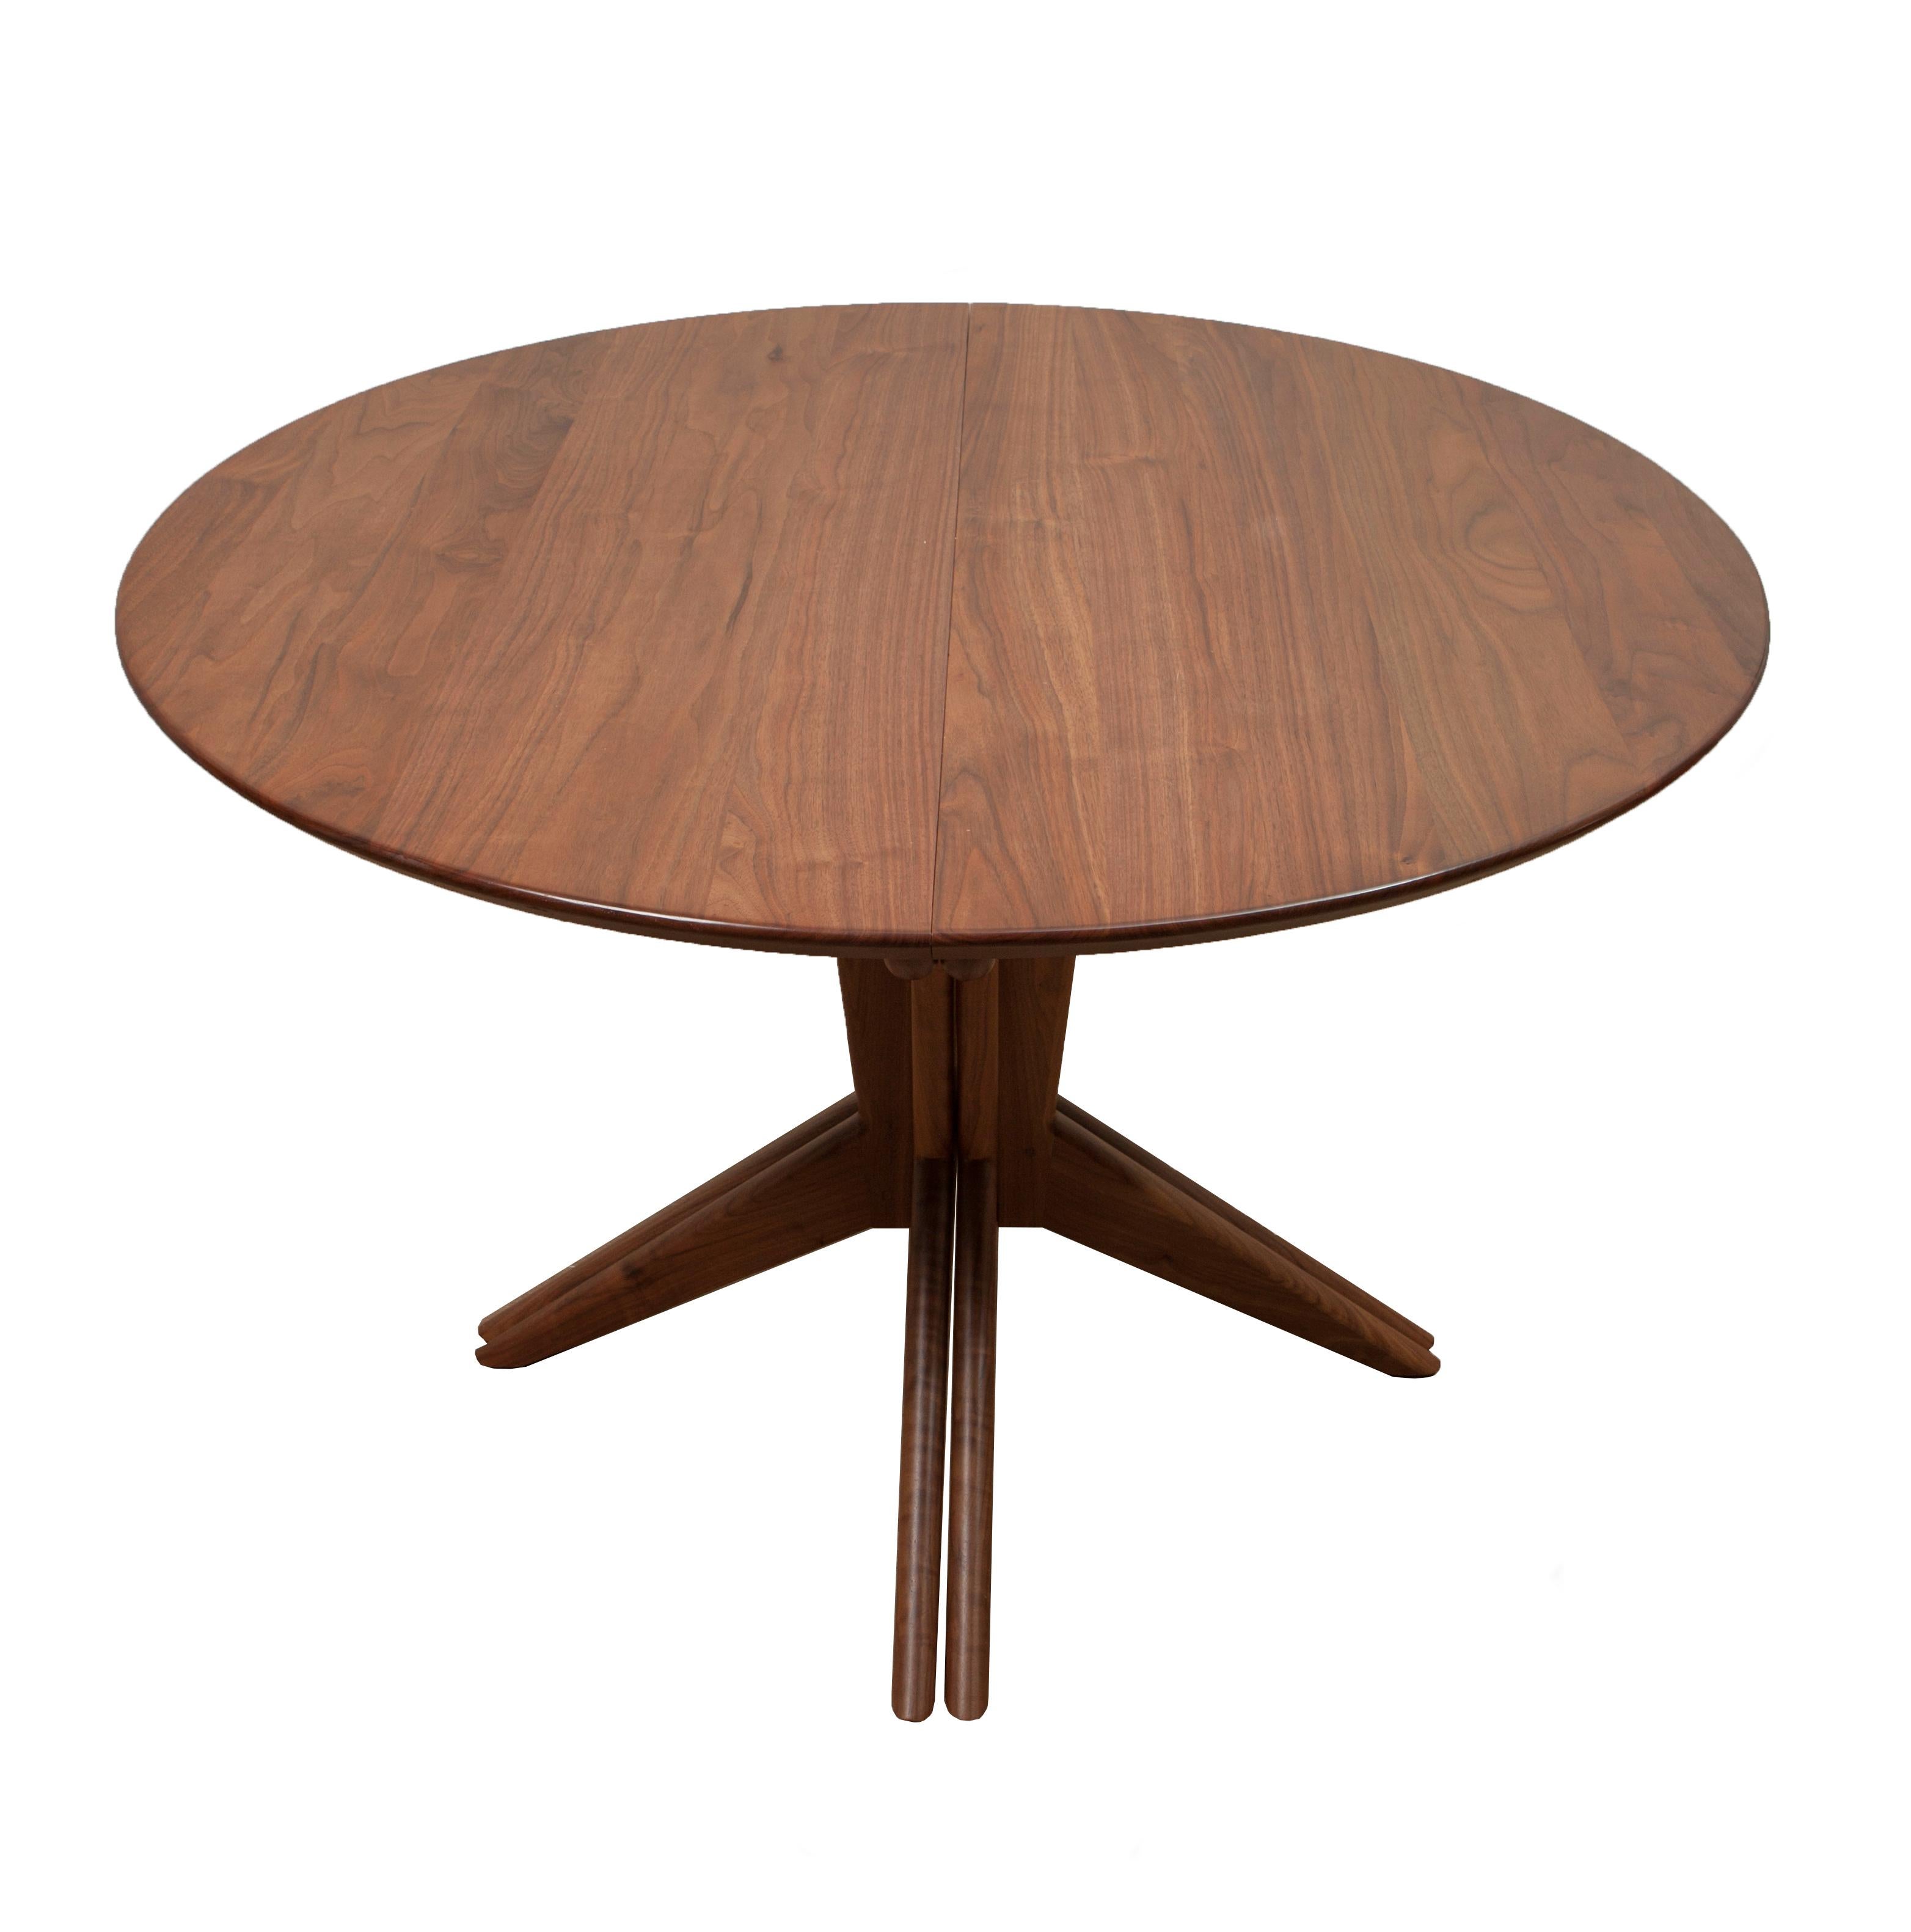 Originally designed by Mel Smilow in 1956 and officially reintroduced in 2014, this solid walnut extension dining table with pedestal base is beautifully versatile. The simplicity of the table’s base splits and expands to accommodate 1-3 leaves. The